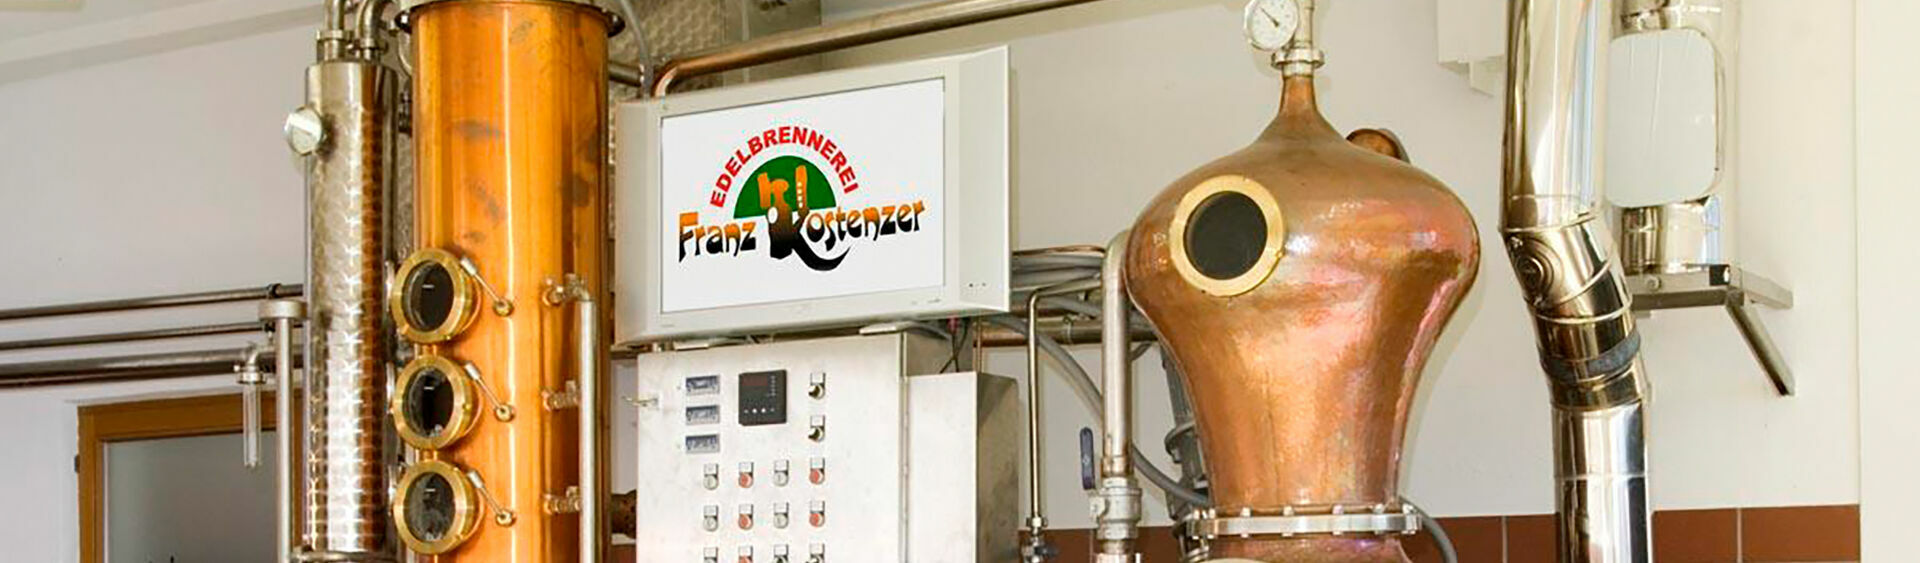 This high-quality distillation equipment is used for the process of distilling schnapps in the Kostenzer noble distillery in Maurach.